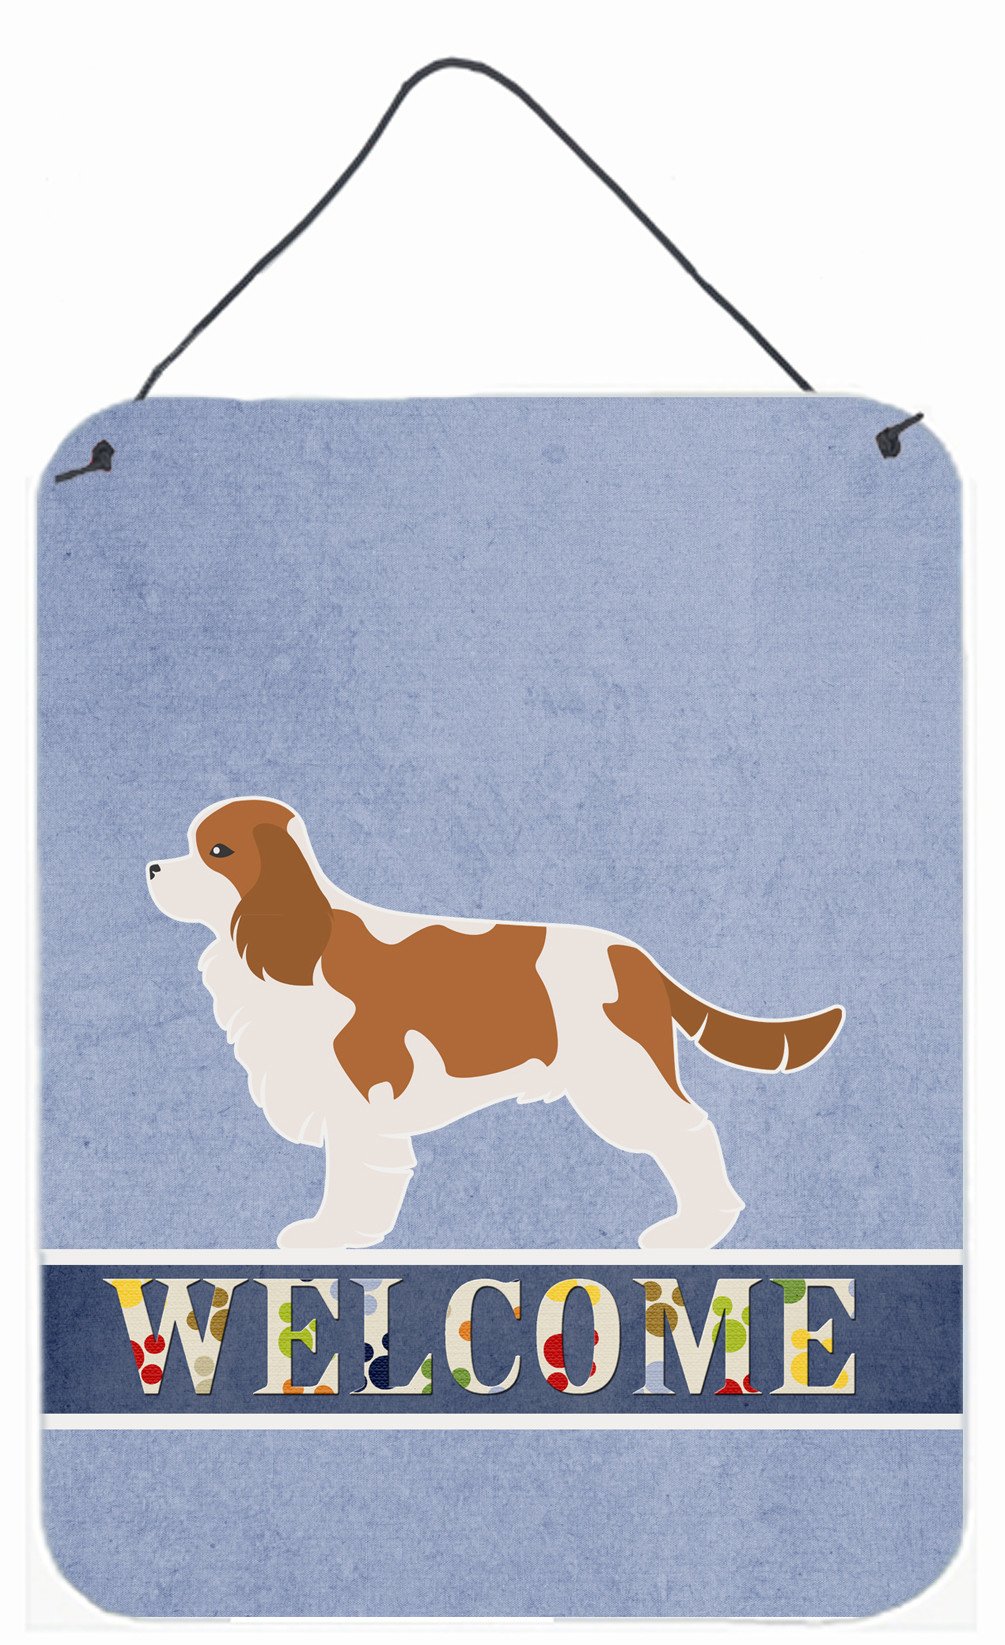 Cavalier King Charles Spaniel Welcome Wall or Door Hanging Prints BB5553DS1216 by Caroline's Treasures